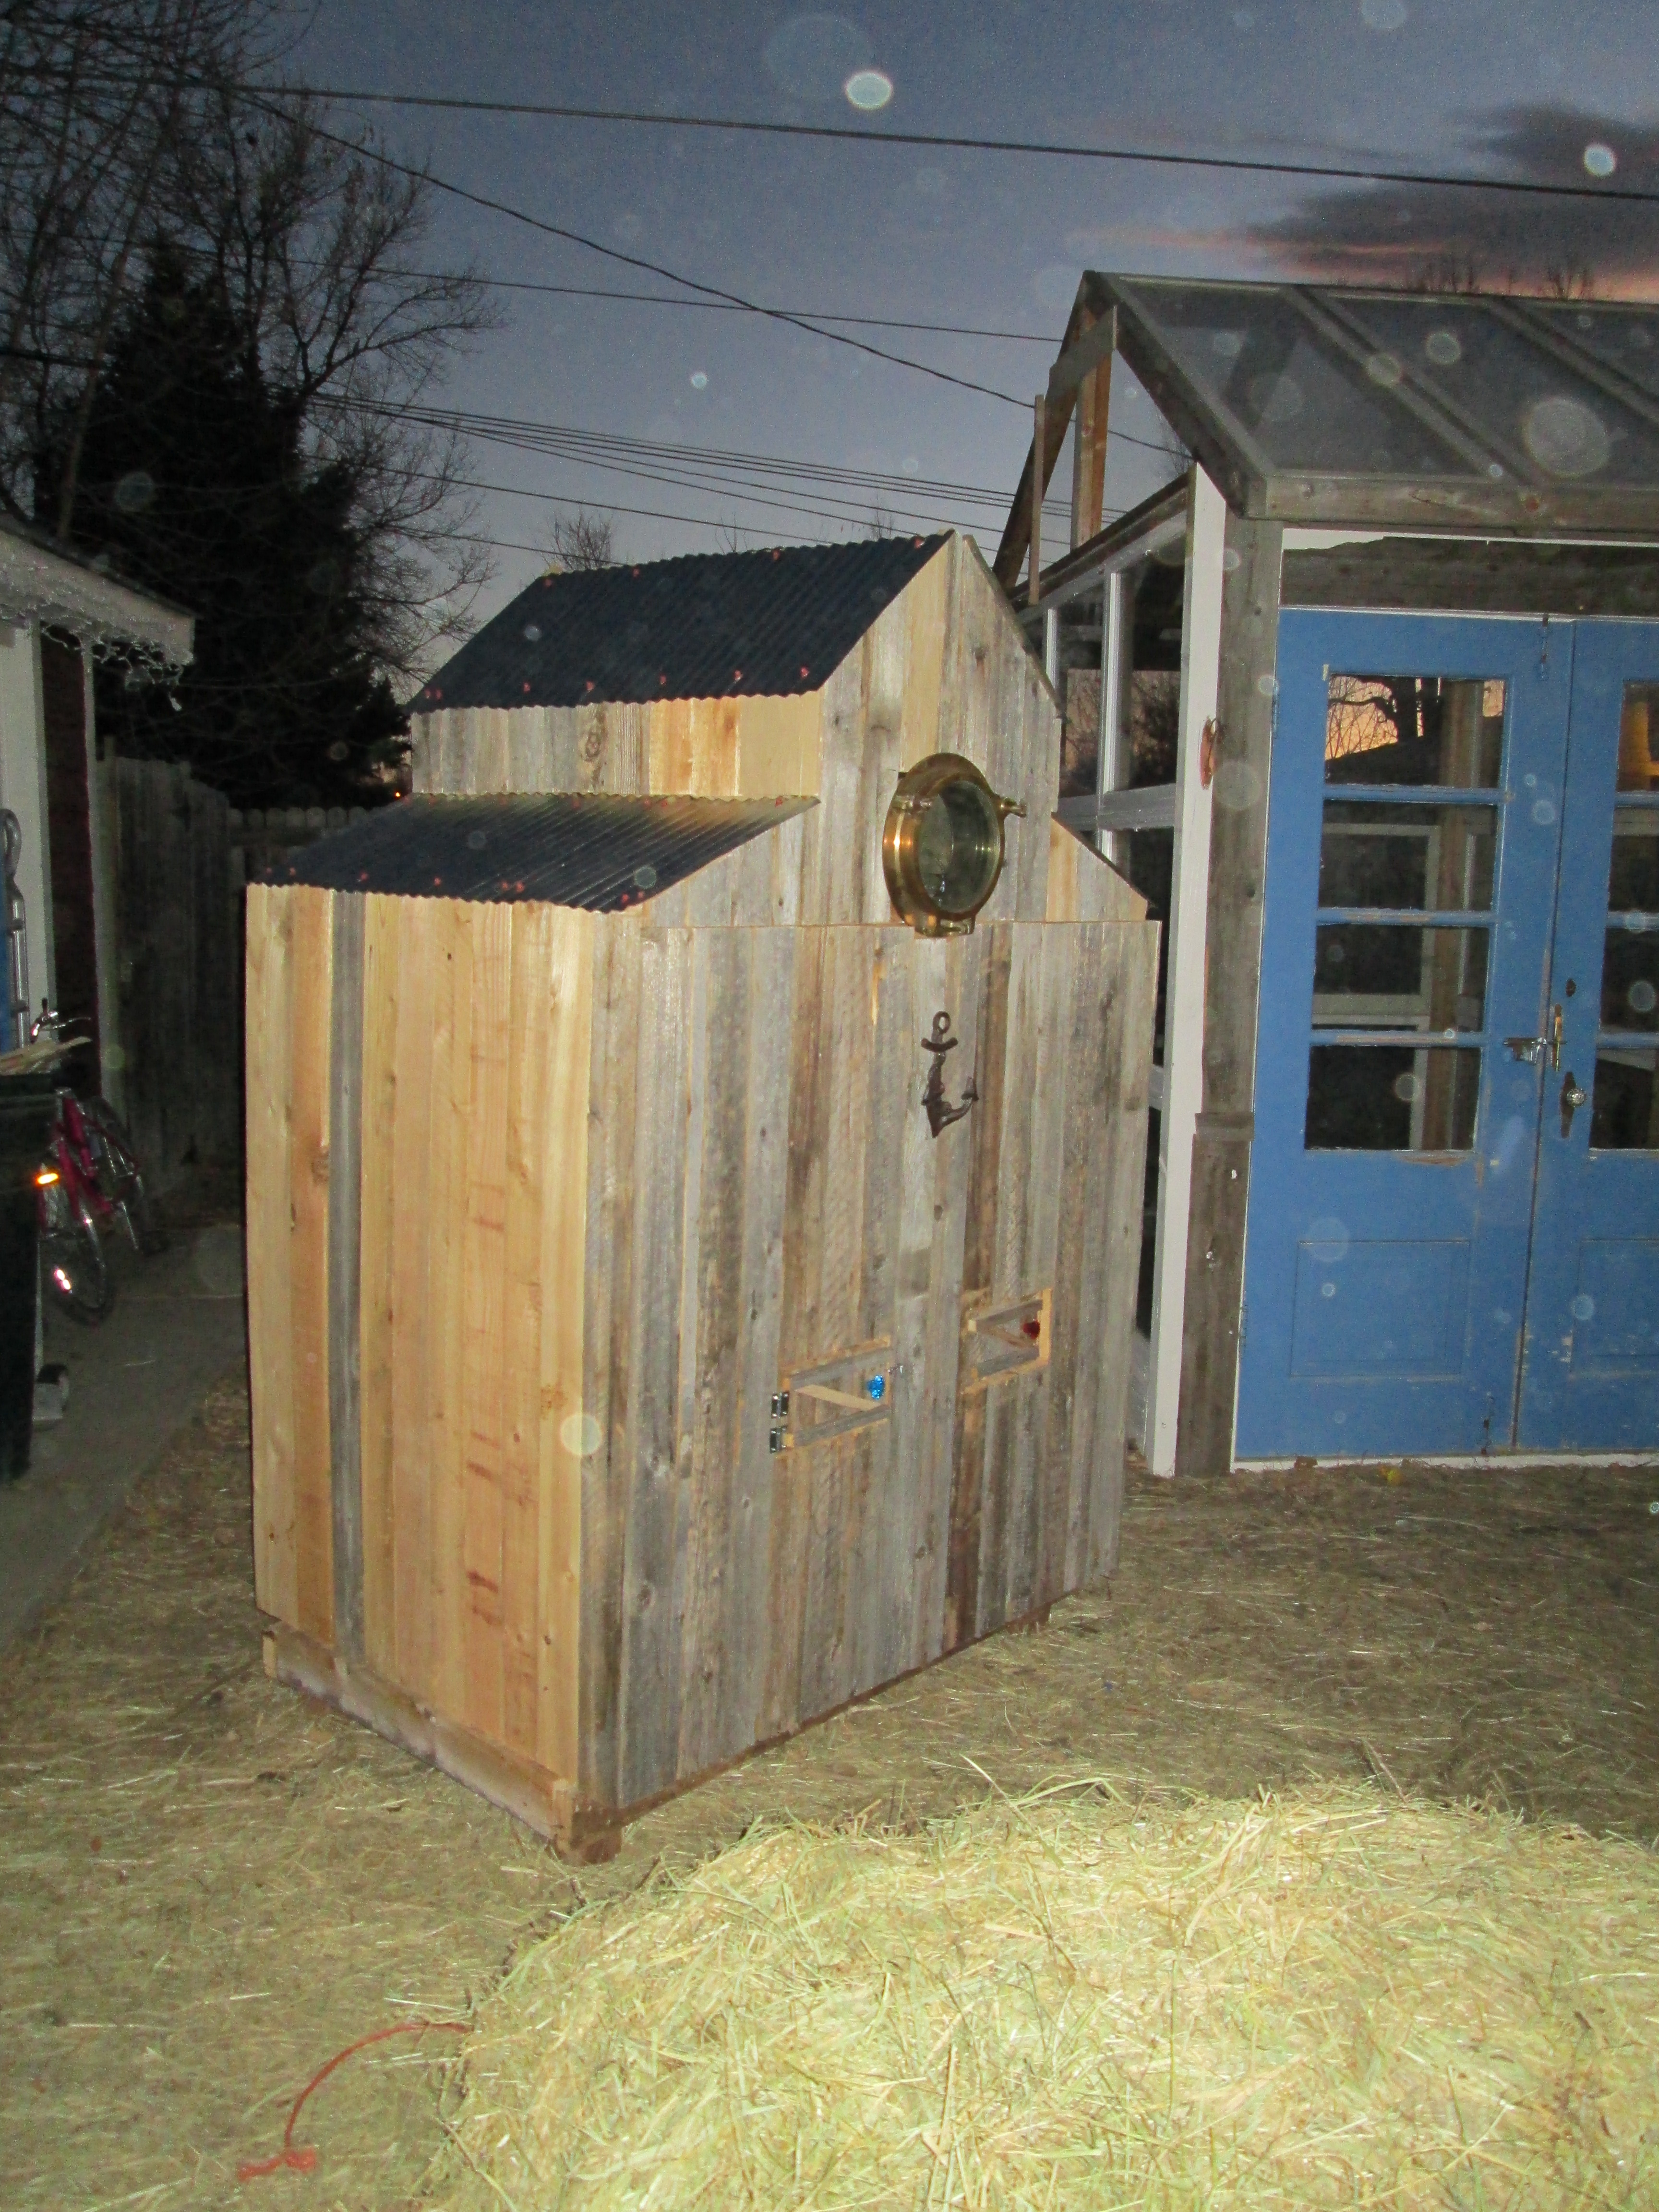 Large Coop with port Hole Window